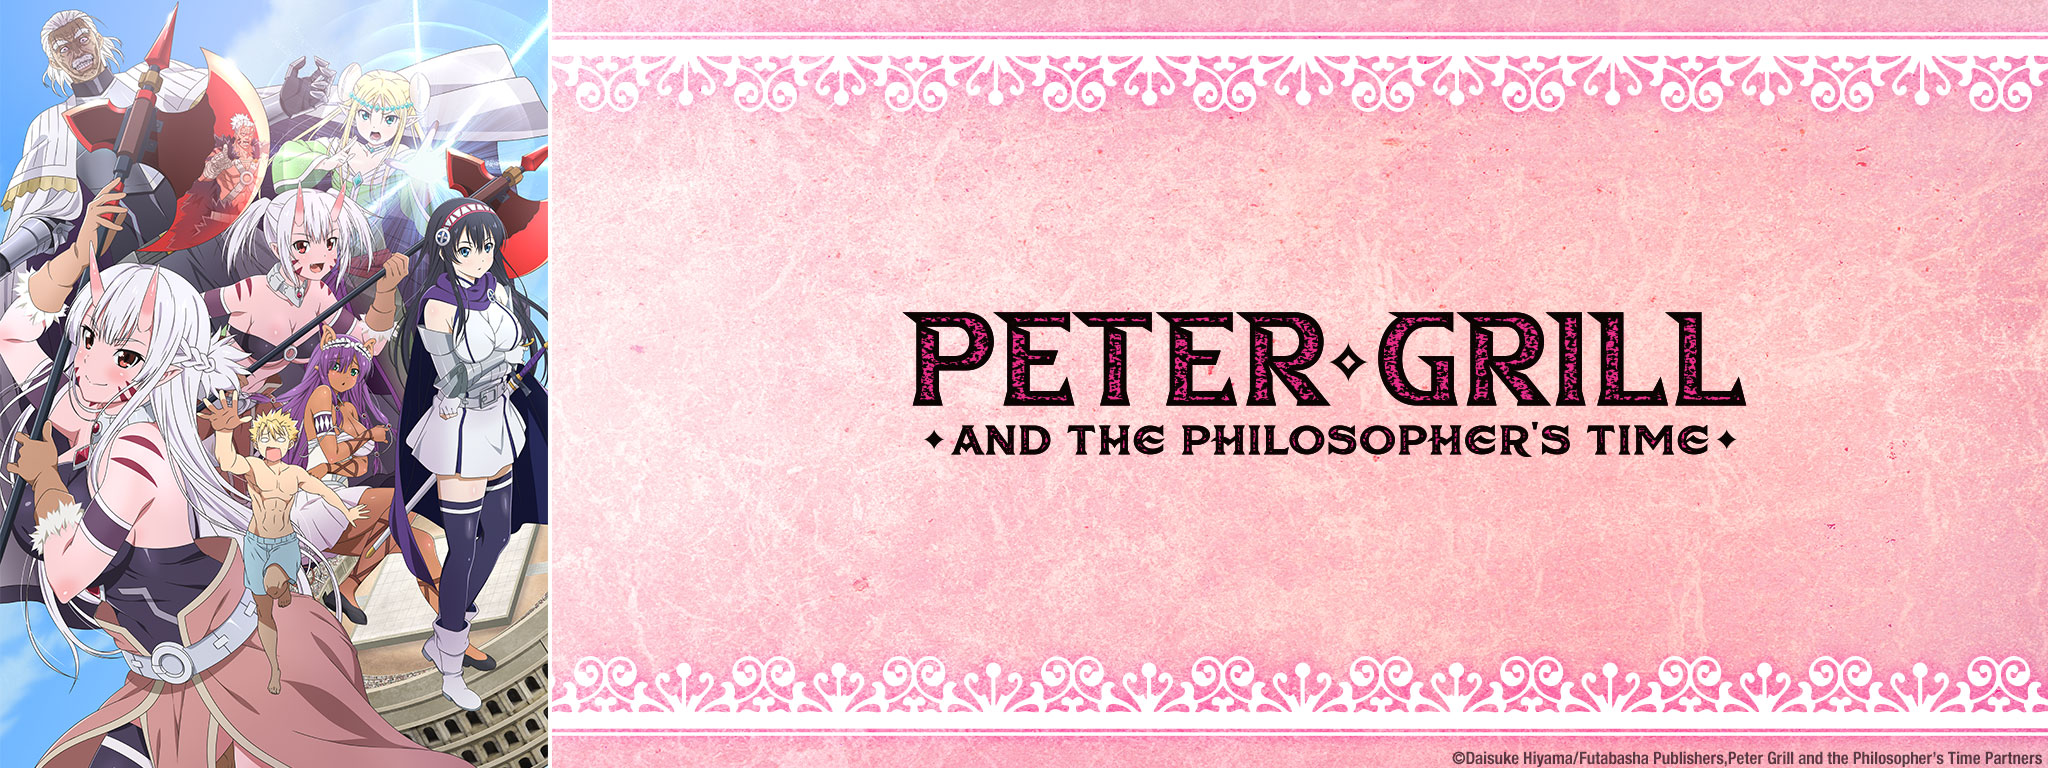 Músicas-tema de 'Peter Grill and the Philosopher's Time